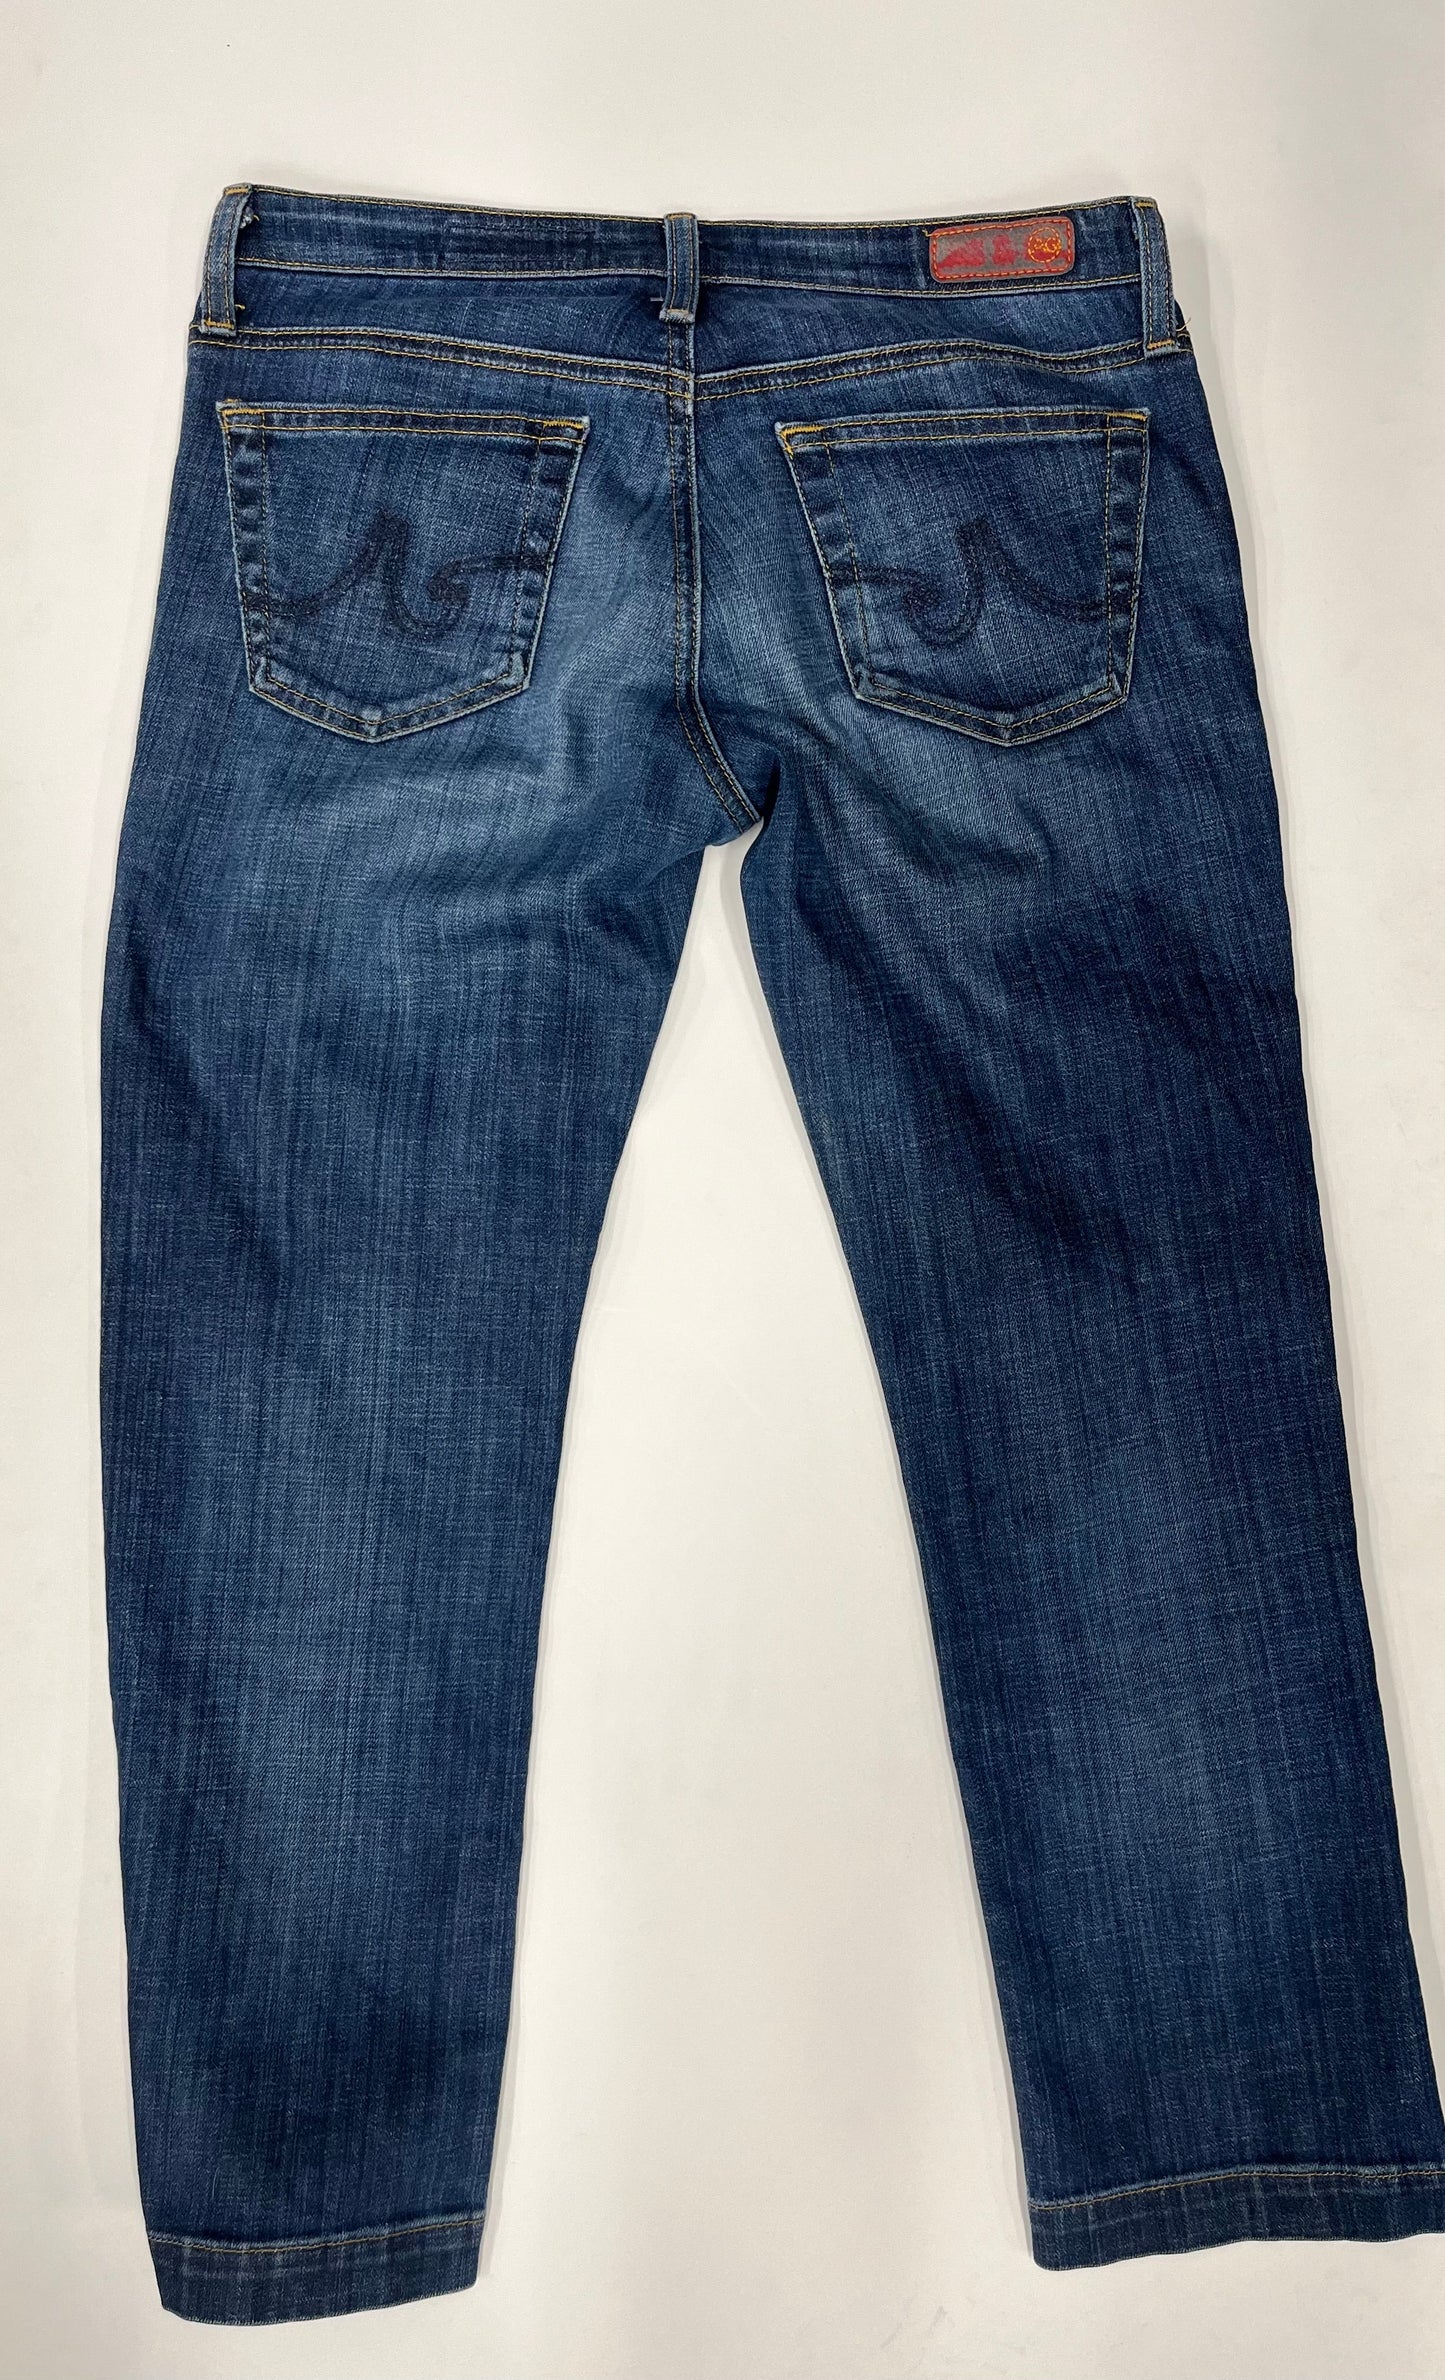 Jeans By Adriano Goldschmied  Size: 4